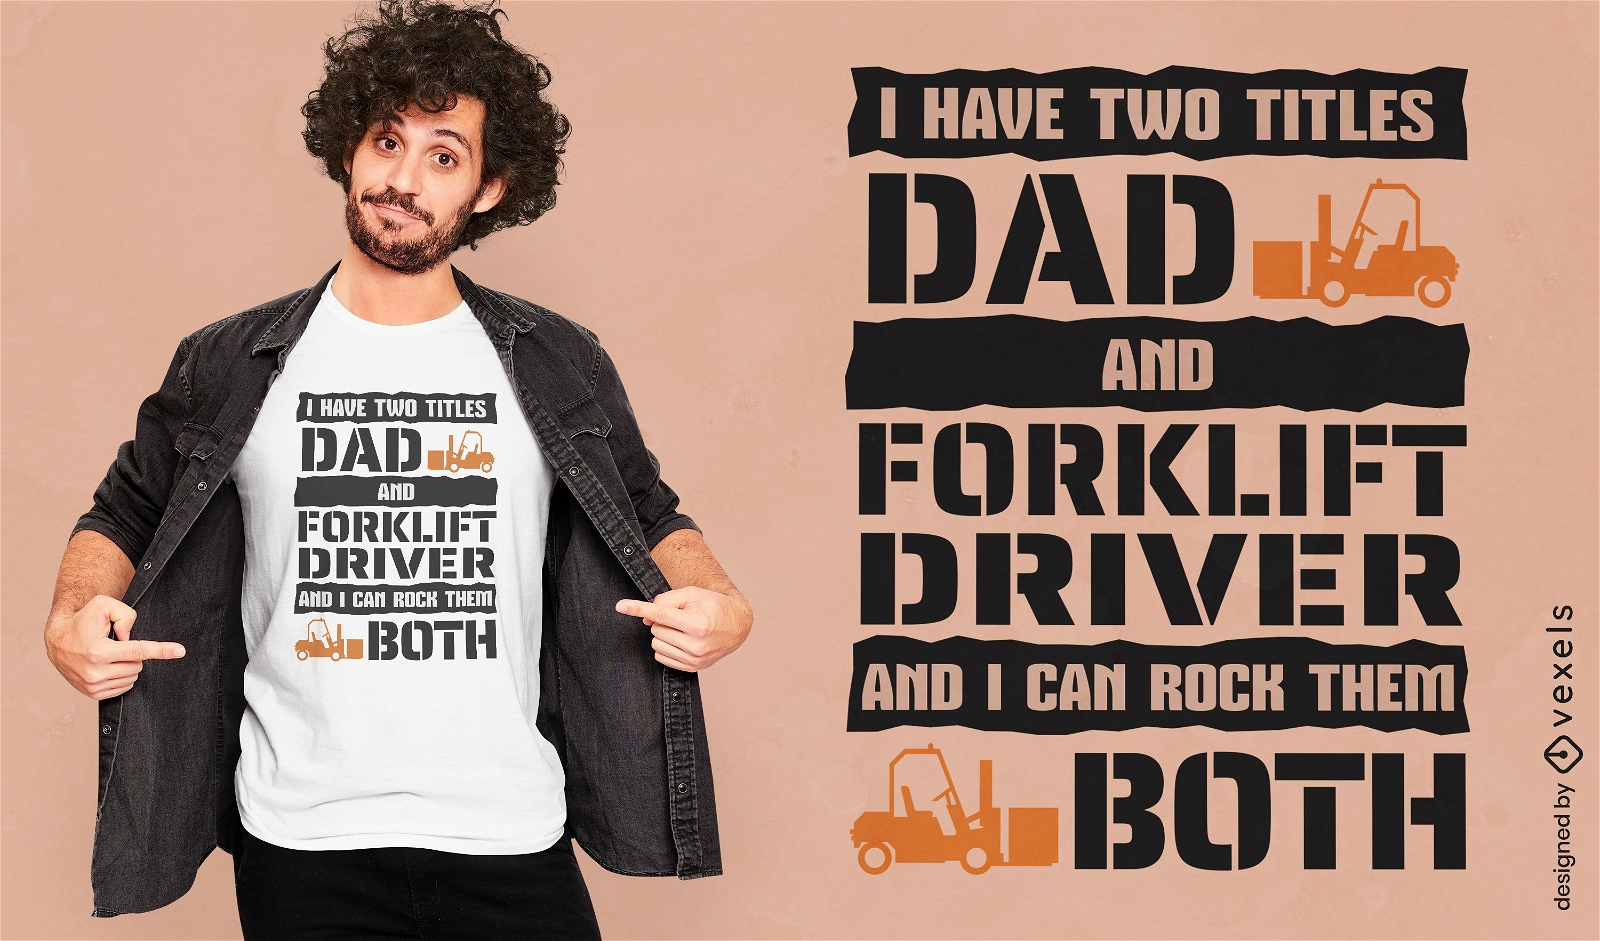 Dad and forklift friver quote t-shirt design